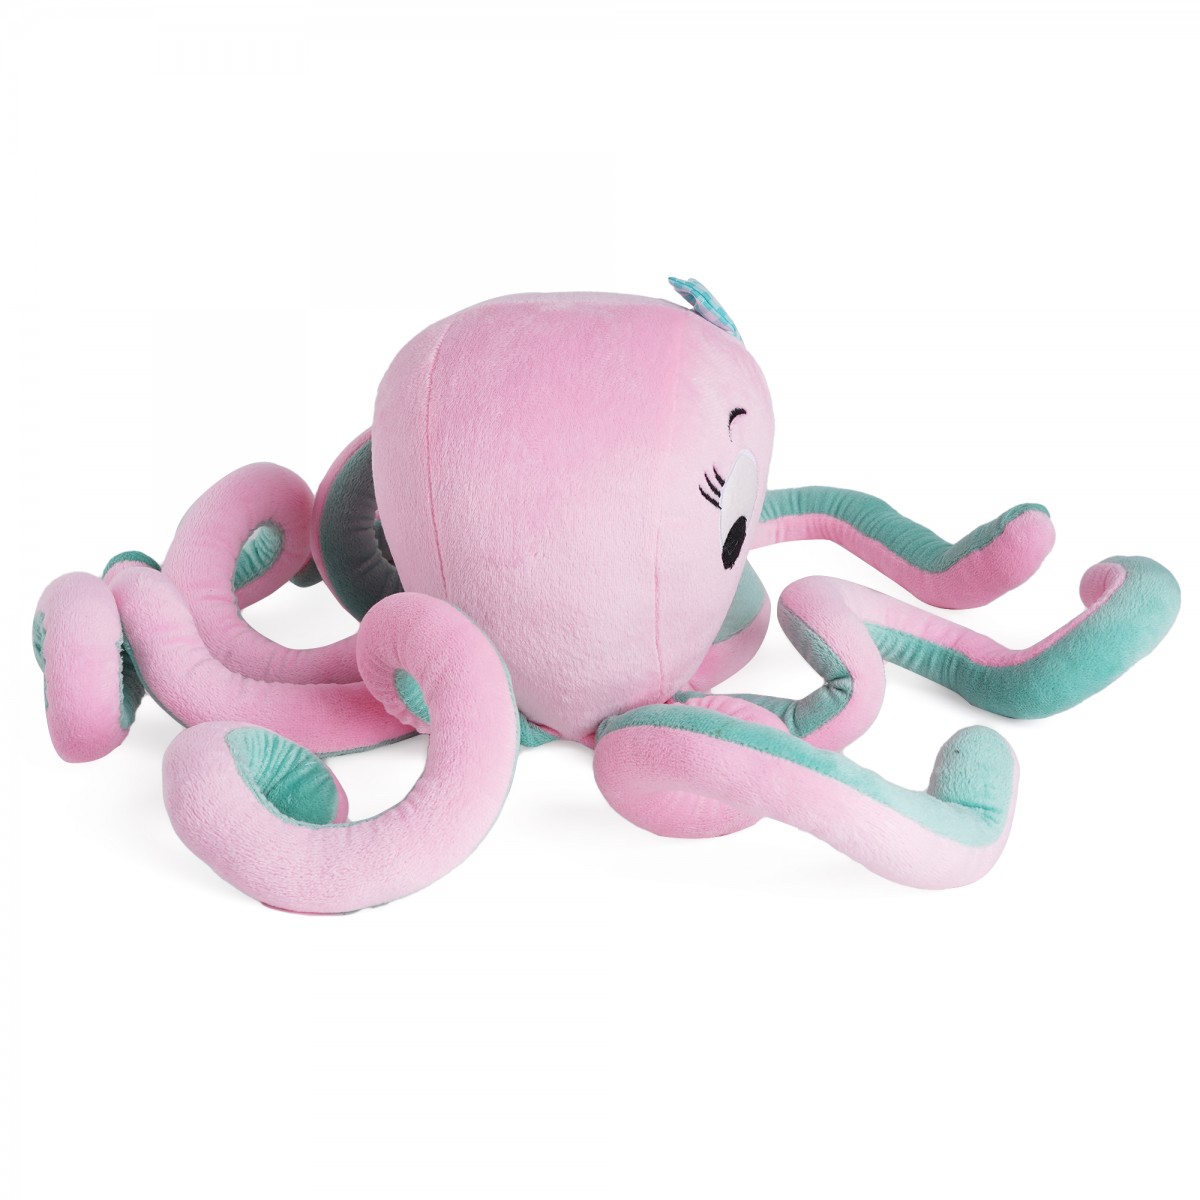 Huggable Cuddly Octopus Stuffed Toy By Fuzzbuzz, Soft Toys for Kids, Cute Plushies Pink, For Kids Of Age 2 Years & Above